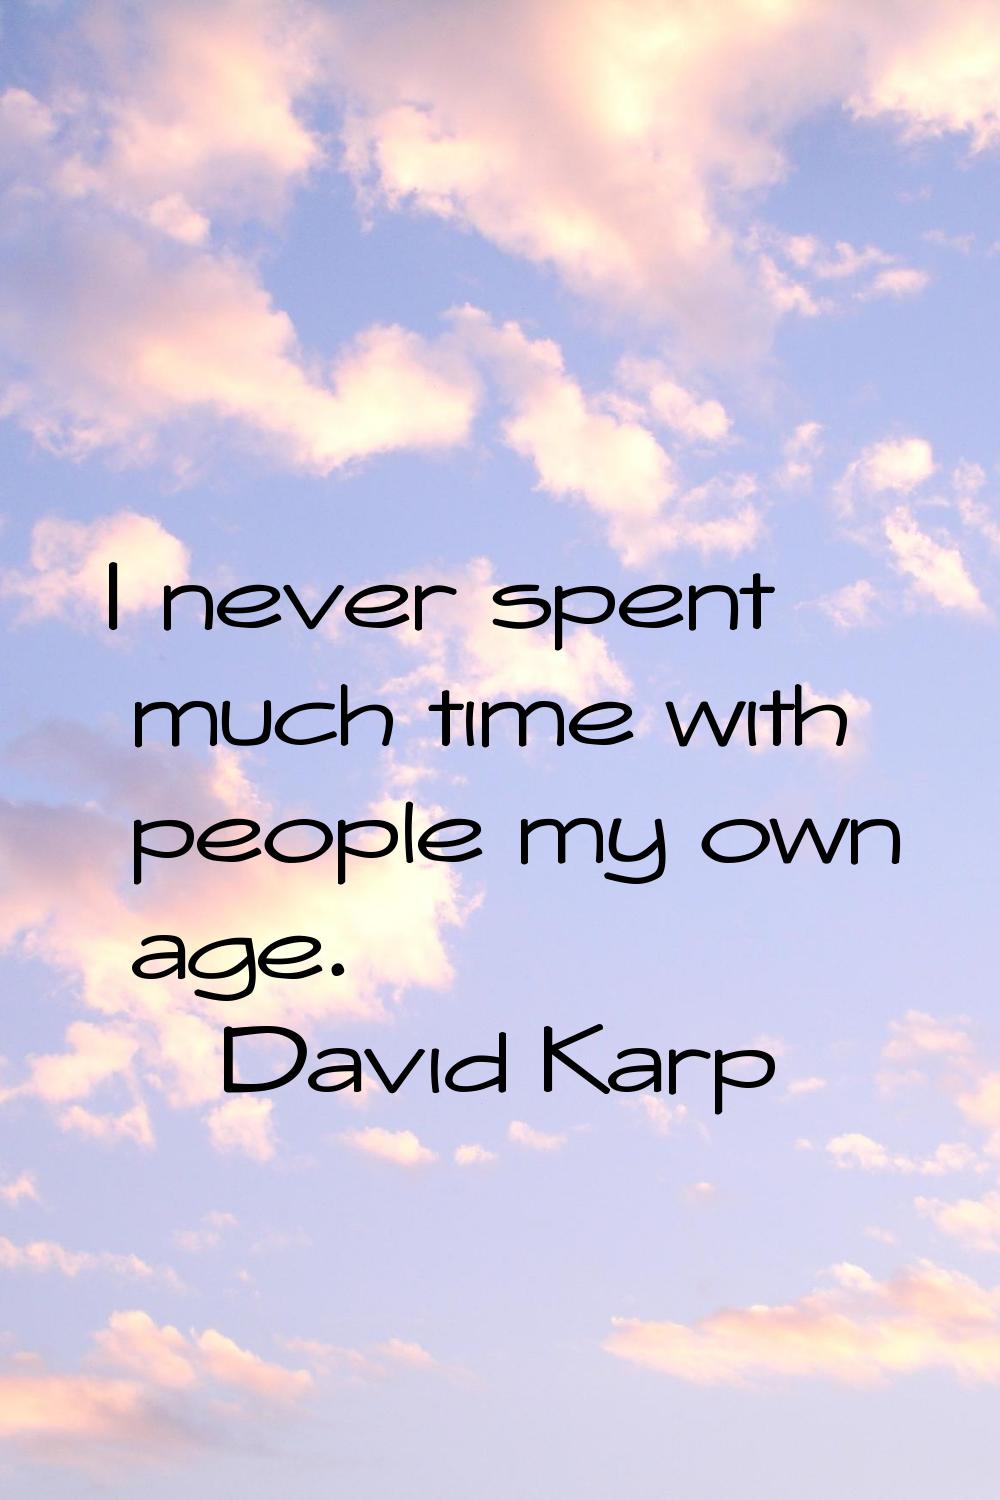 I never spent much time with people my own age.